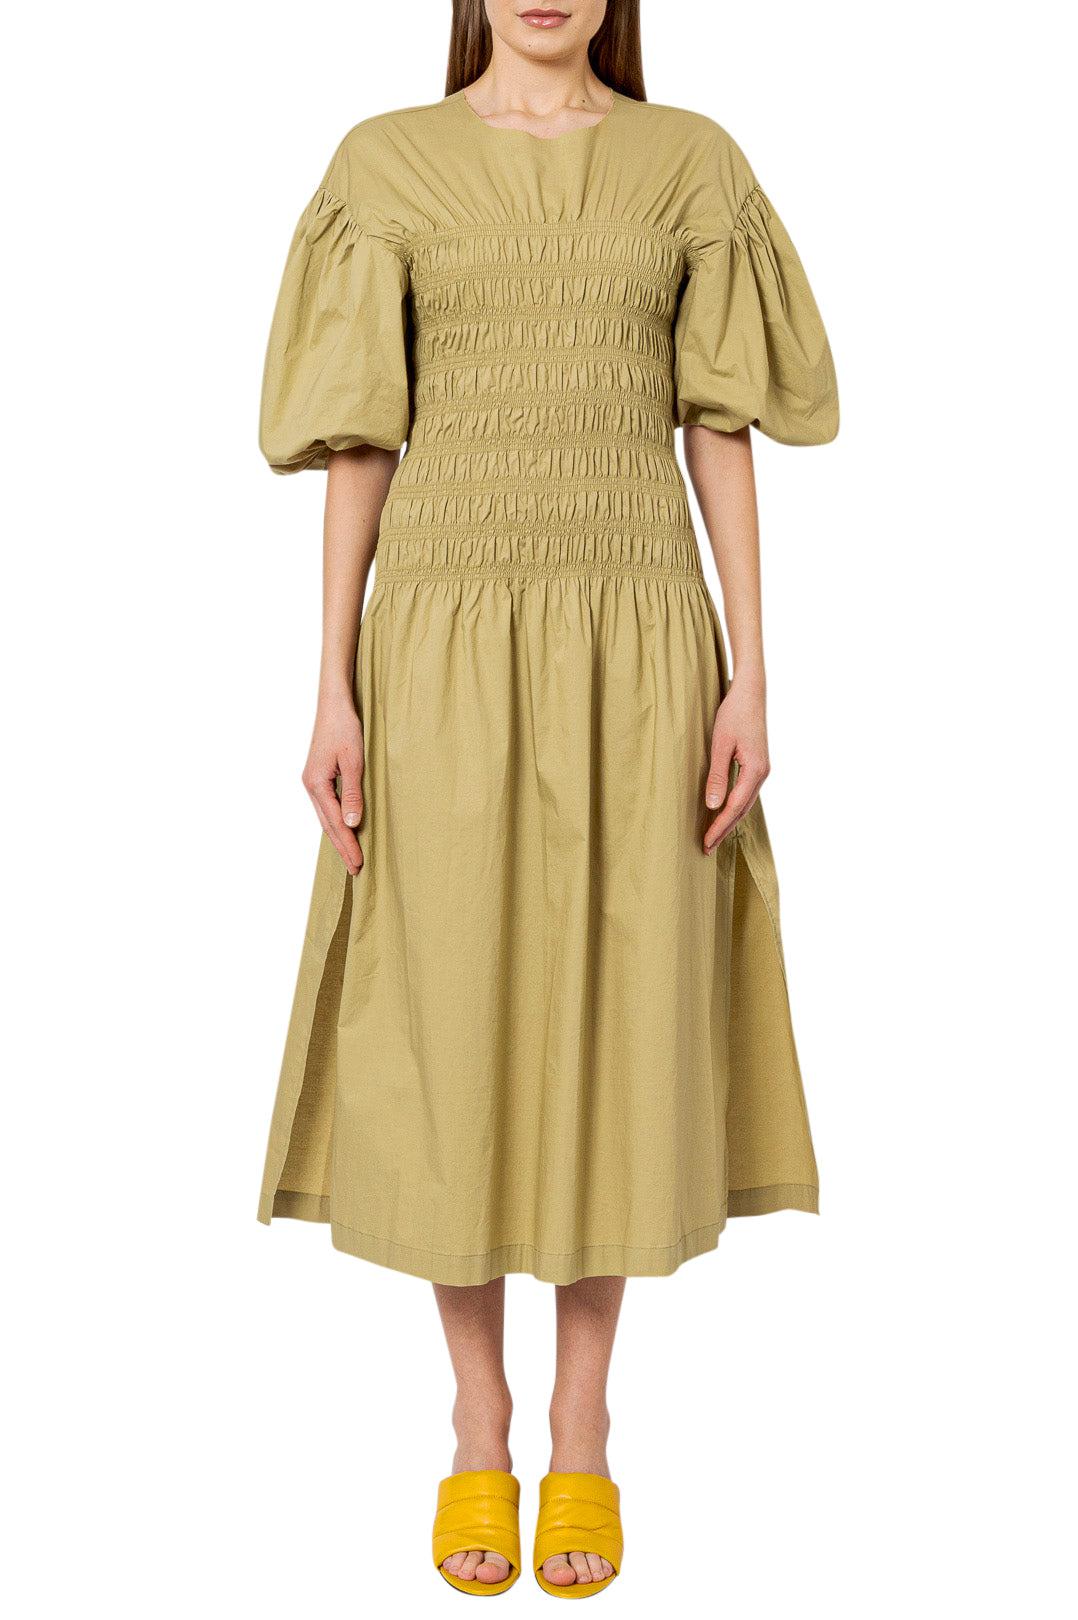 The Garment-Flared midi-dress with ruffled detail-dgallerystore